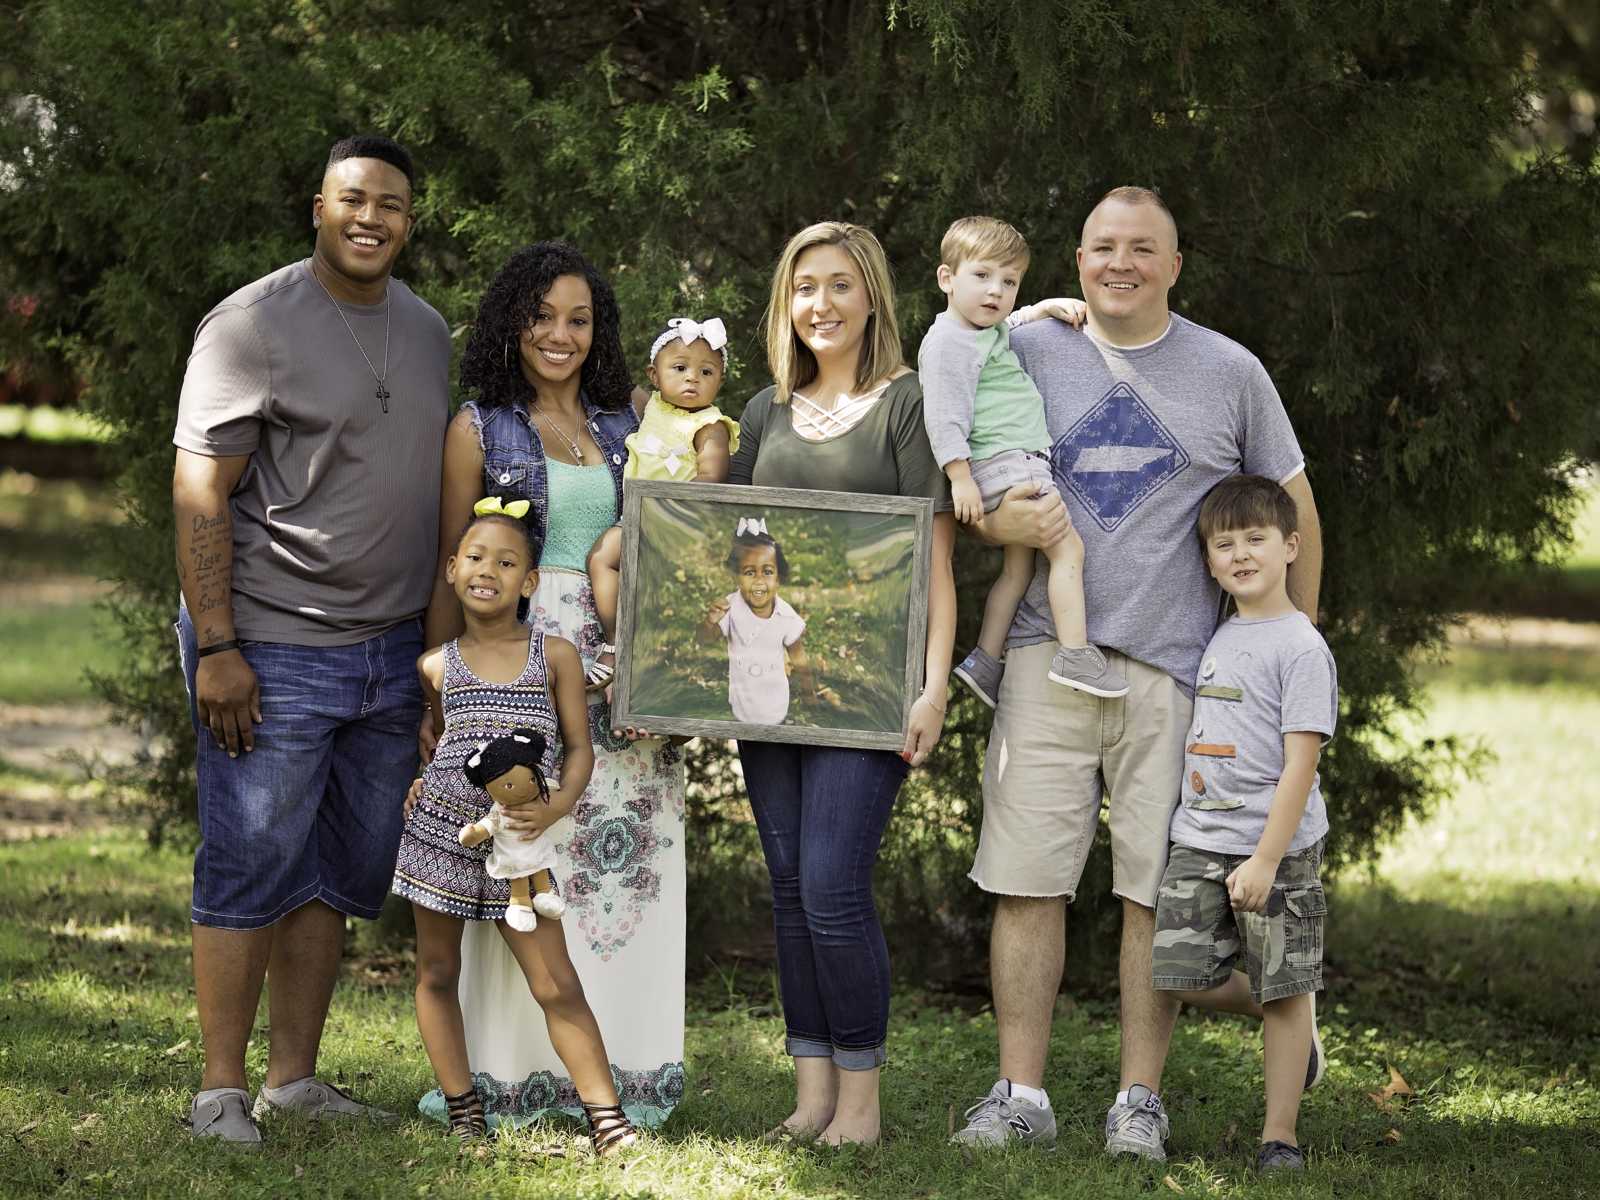 families pose for picture with picture frame of deceased toddler in the center